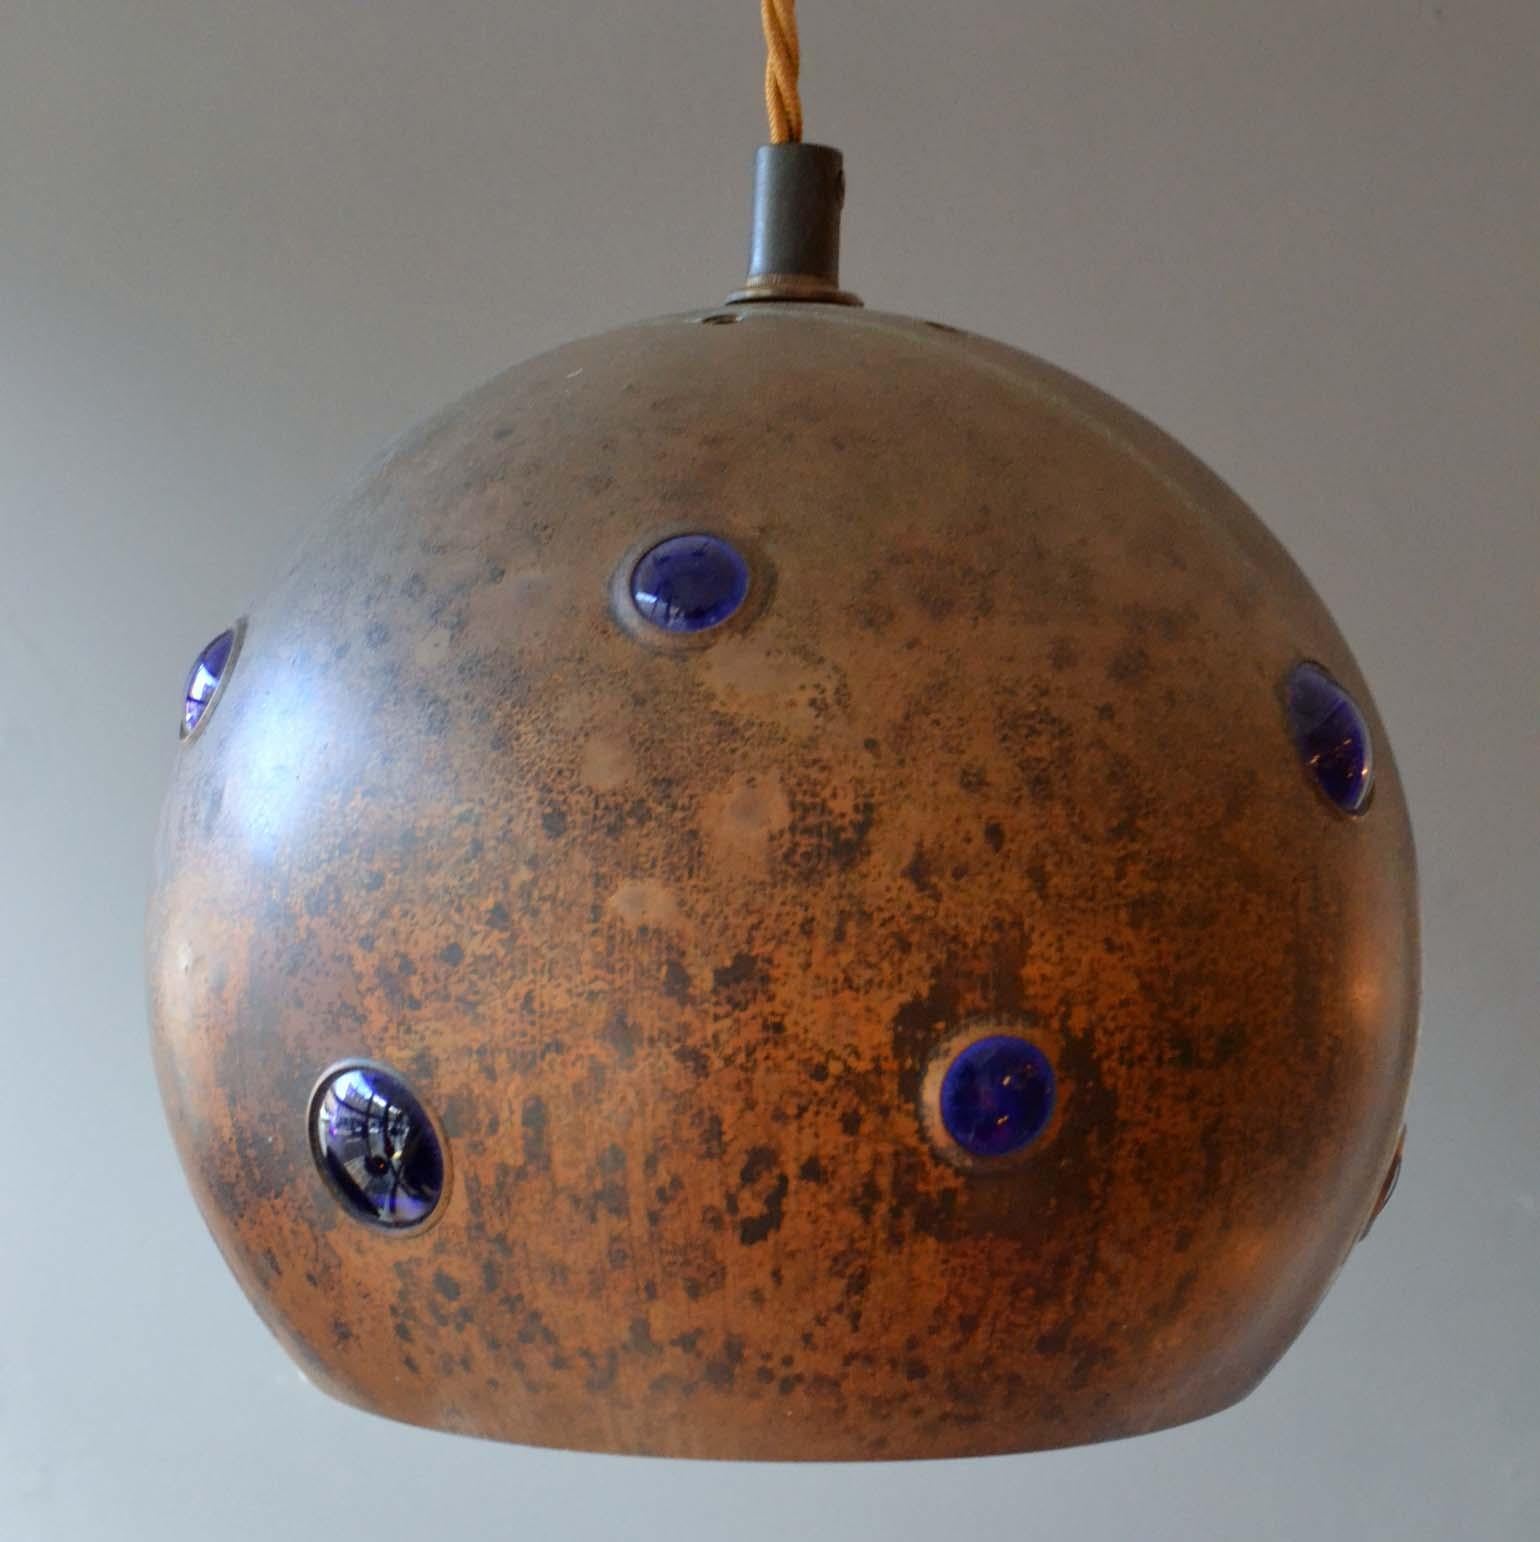 Mid-Century Modern blue glass & patinated copper pendant lamps. They are unique in execution. Deep blue glass is blown into oxidized copper spherical shells and glass creates bubbles through the holes. The lamps can be adjusted to alternating